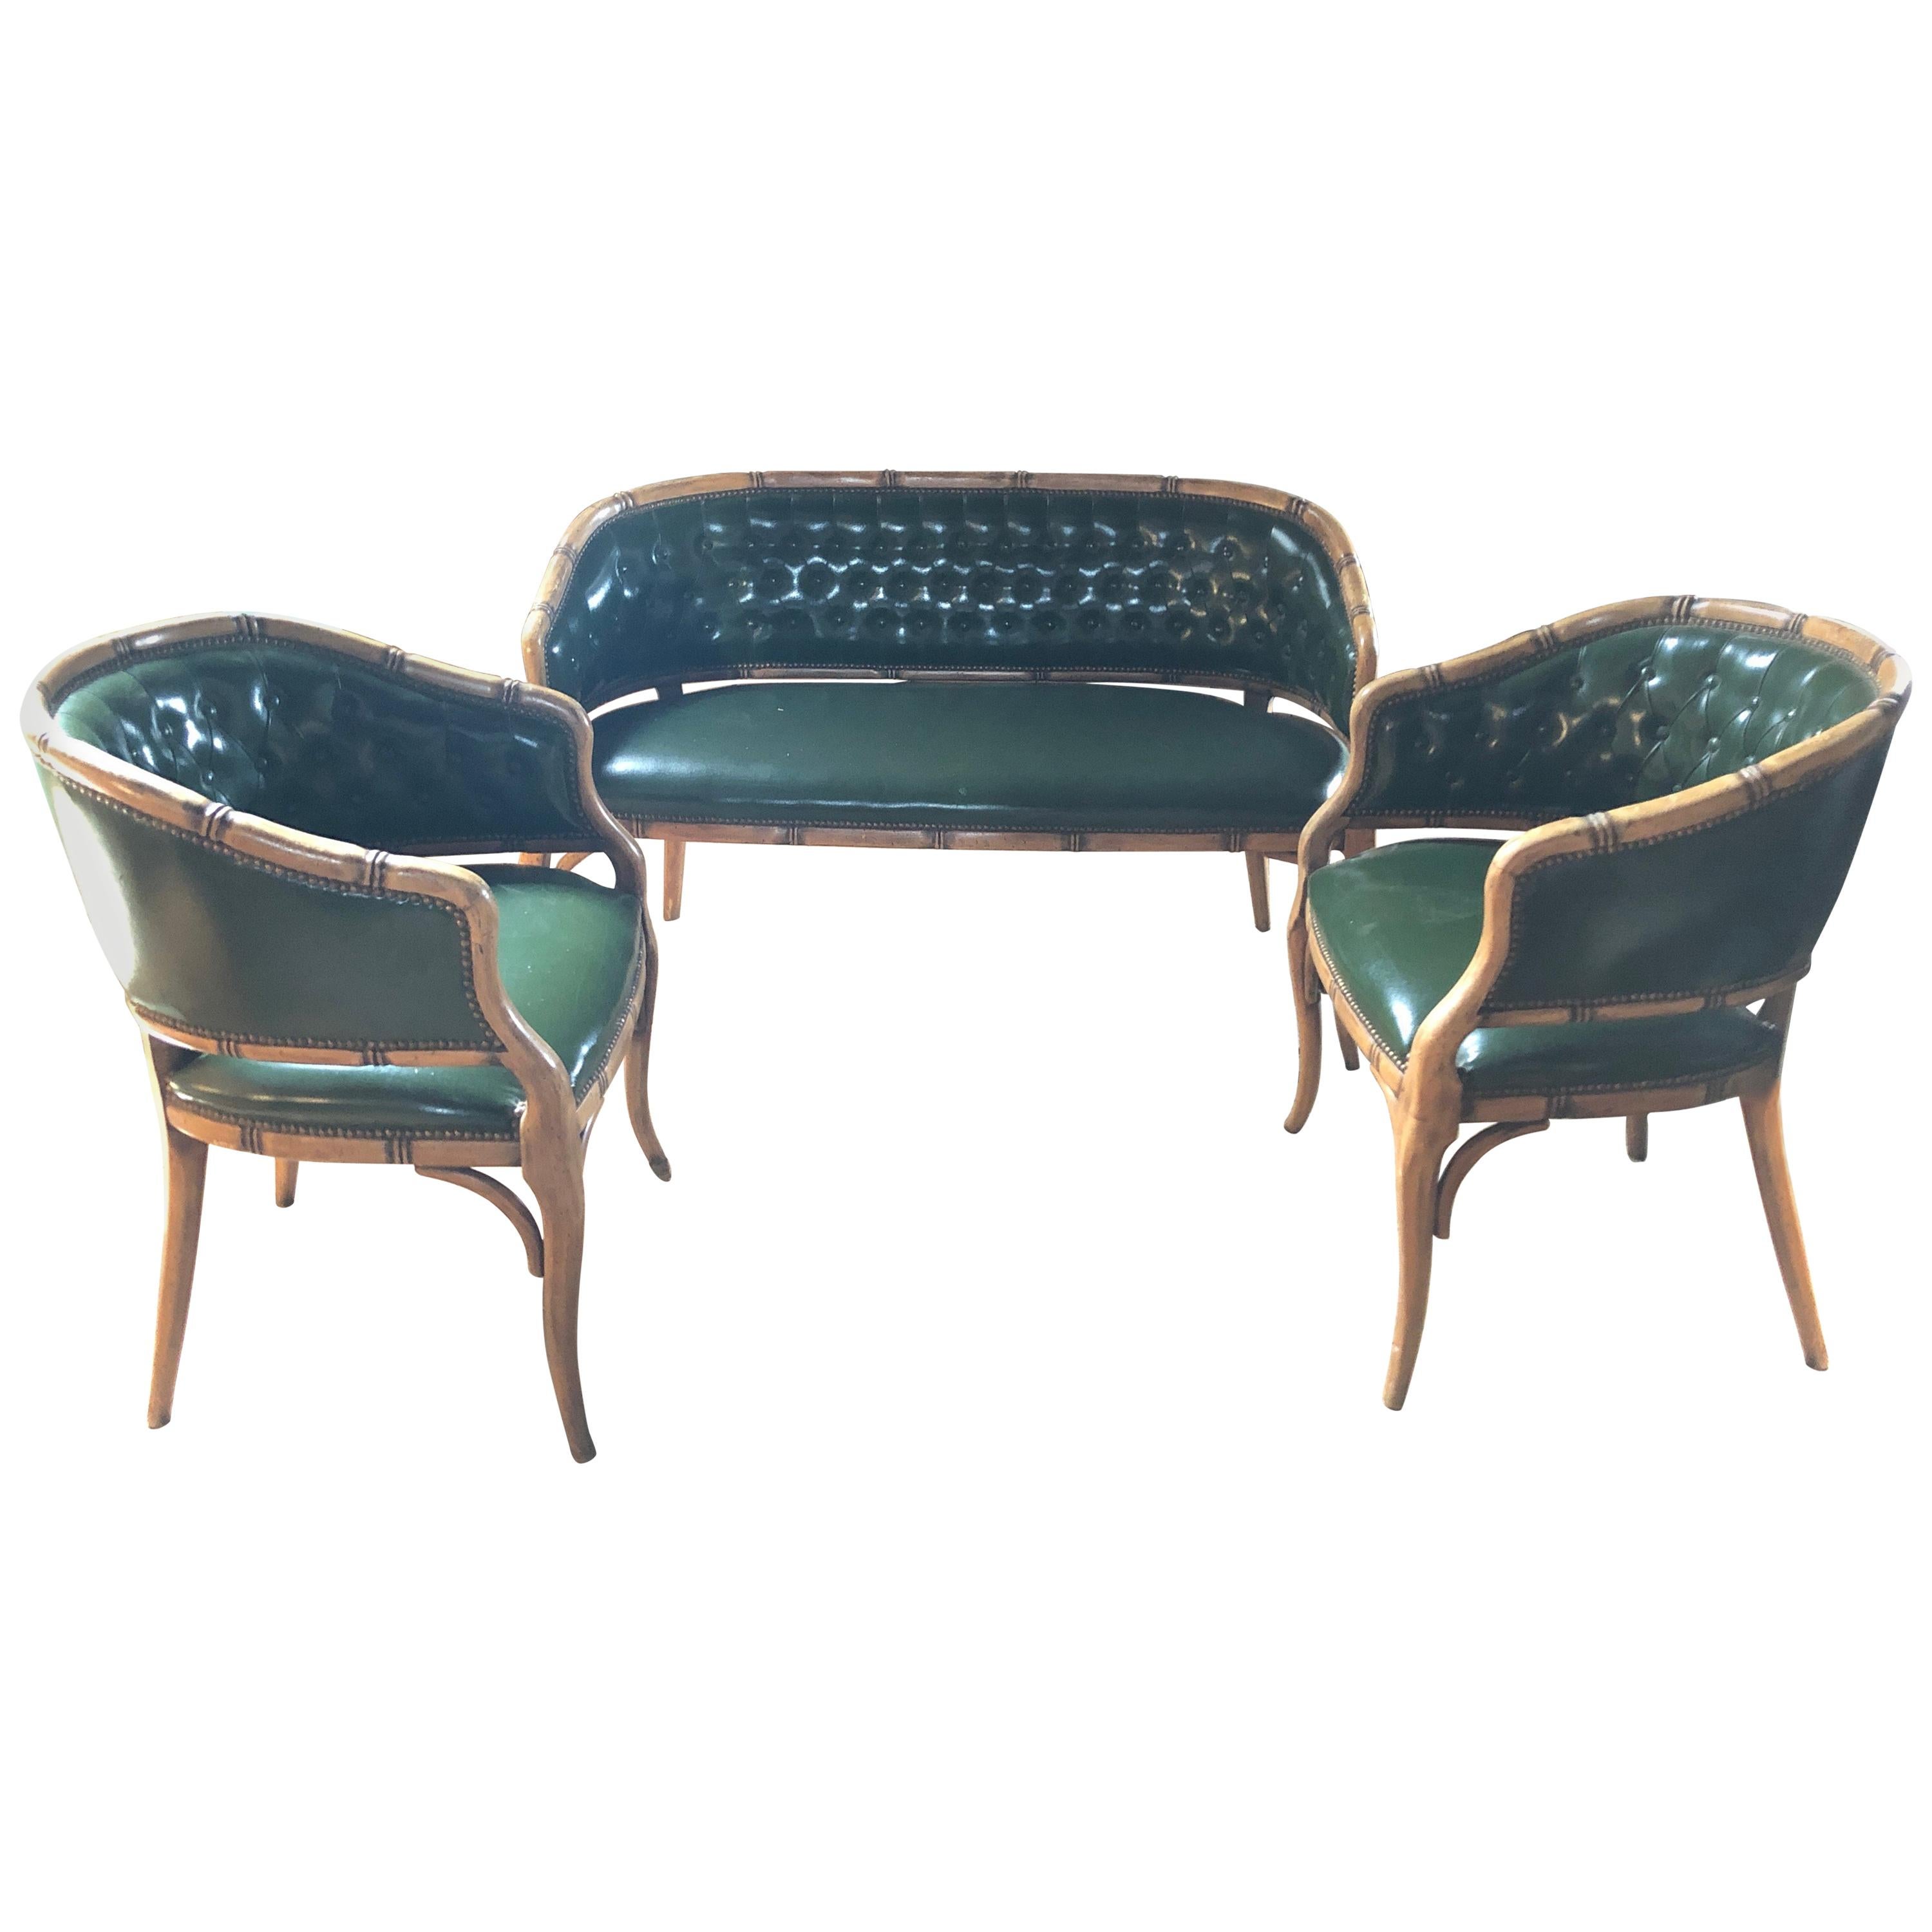 Libraryish Set of Three-Piece Green Tufted Faux Leather and Bamboo Salon Suite